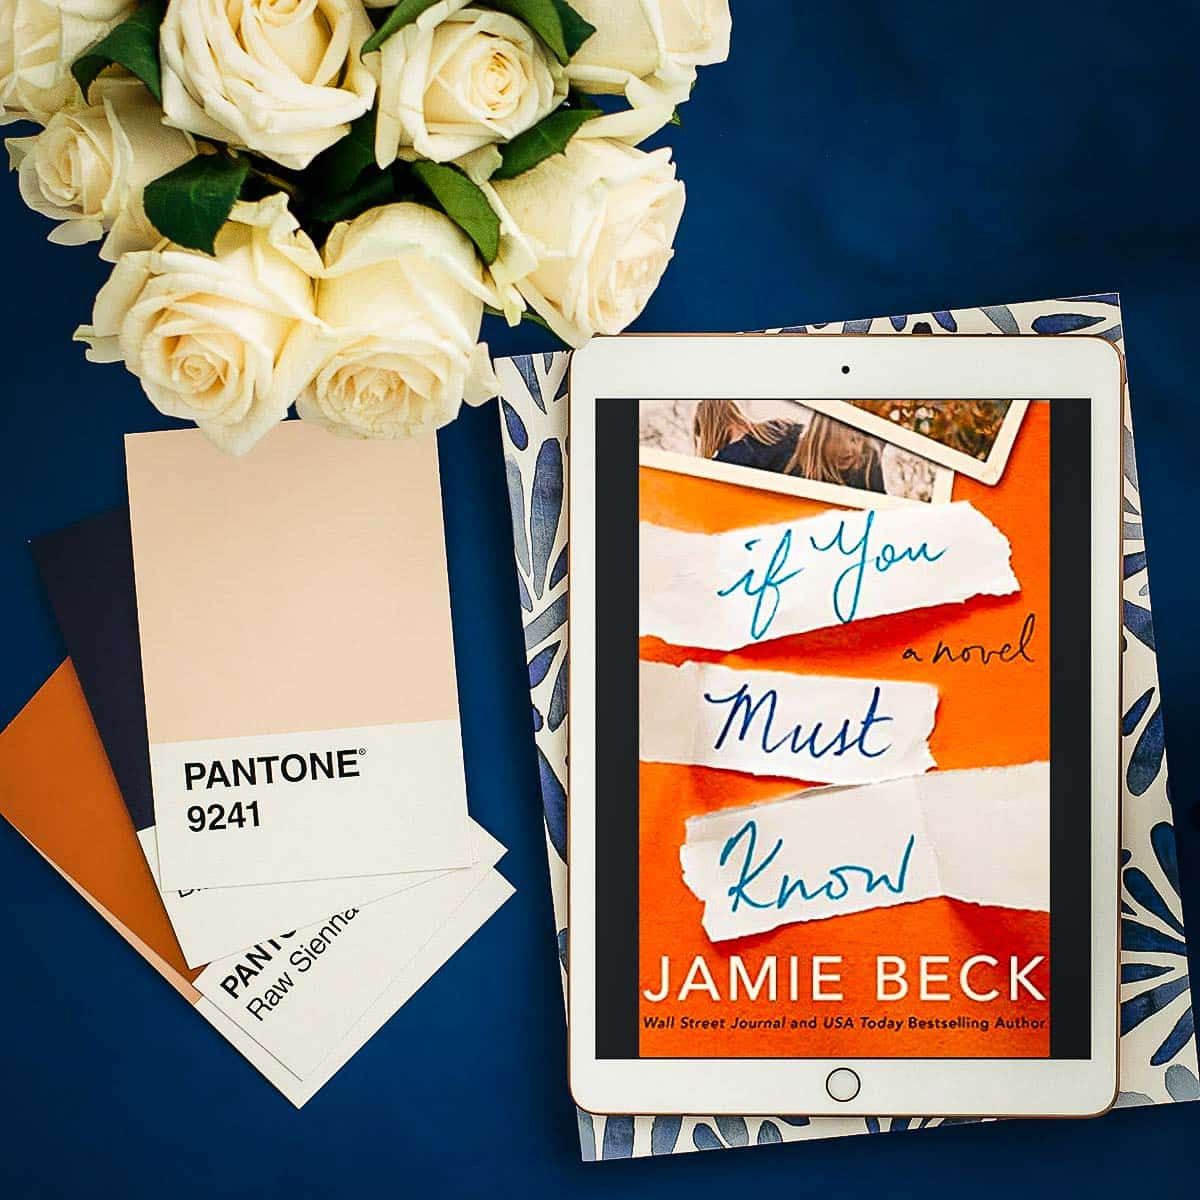 IF YOU MUST KNOW by Jamie Beck, Potomac Point book 1, is now available! Enjoy this Q&A with Jamie, check out an excerpt from the book, and grab your copy!